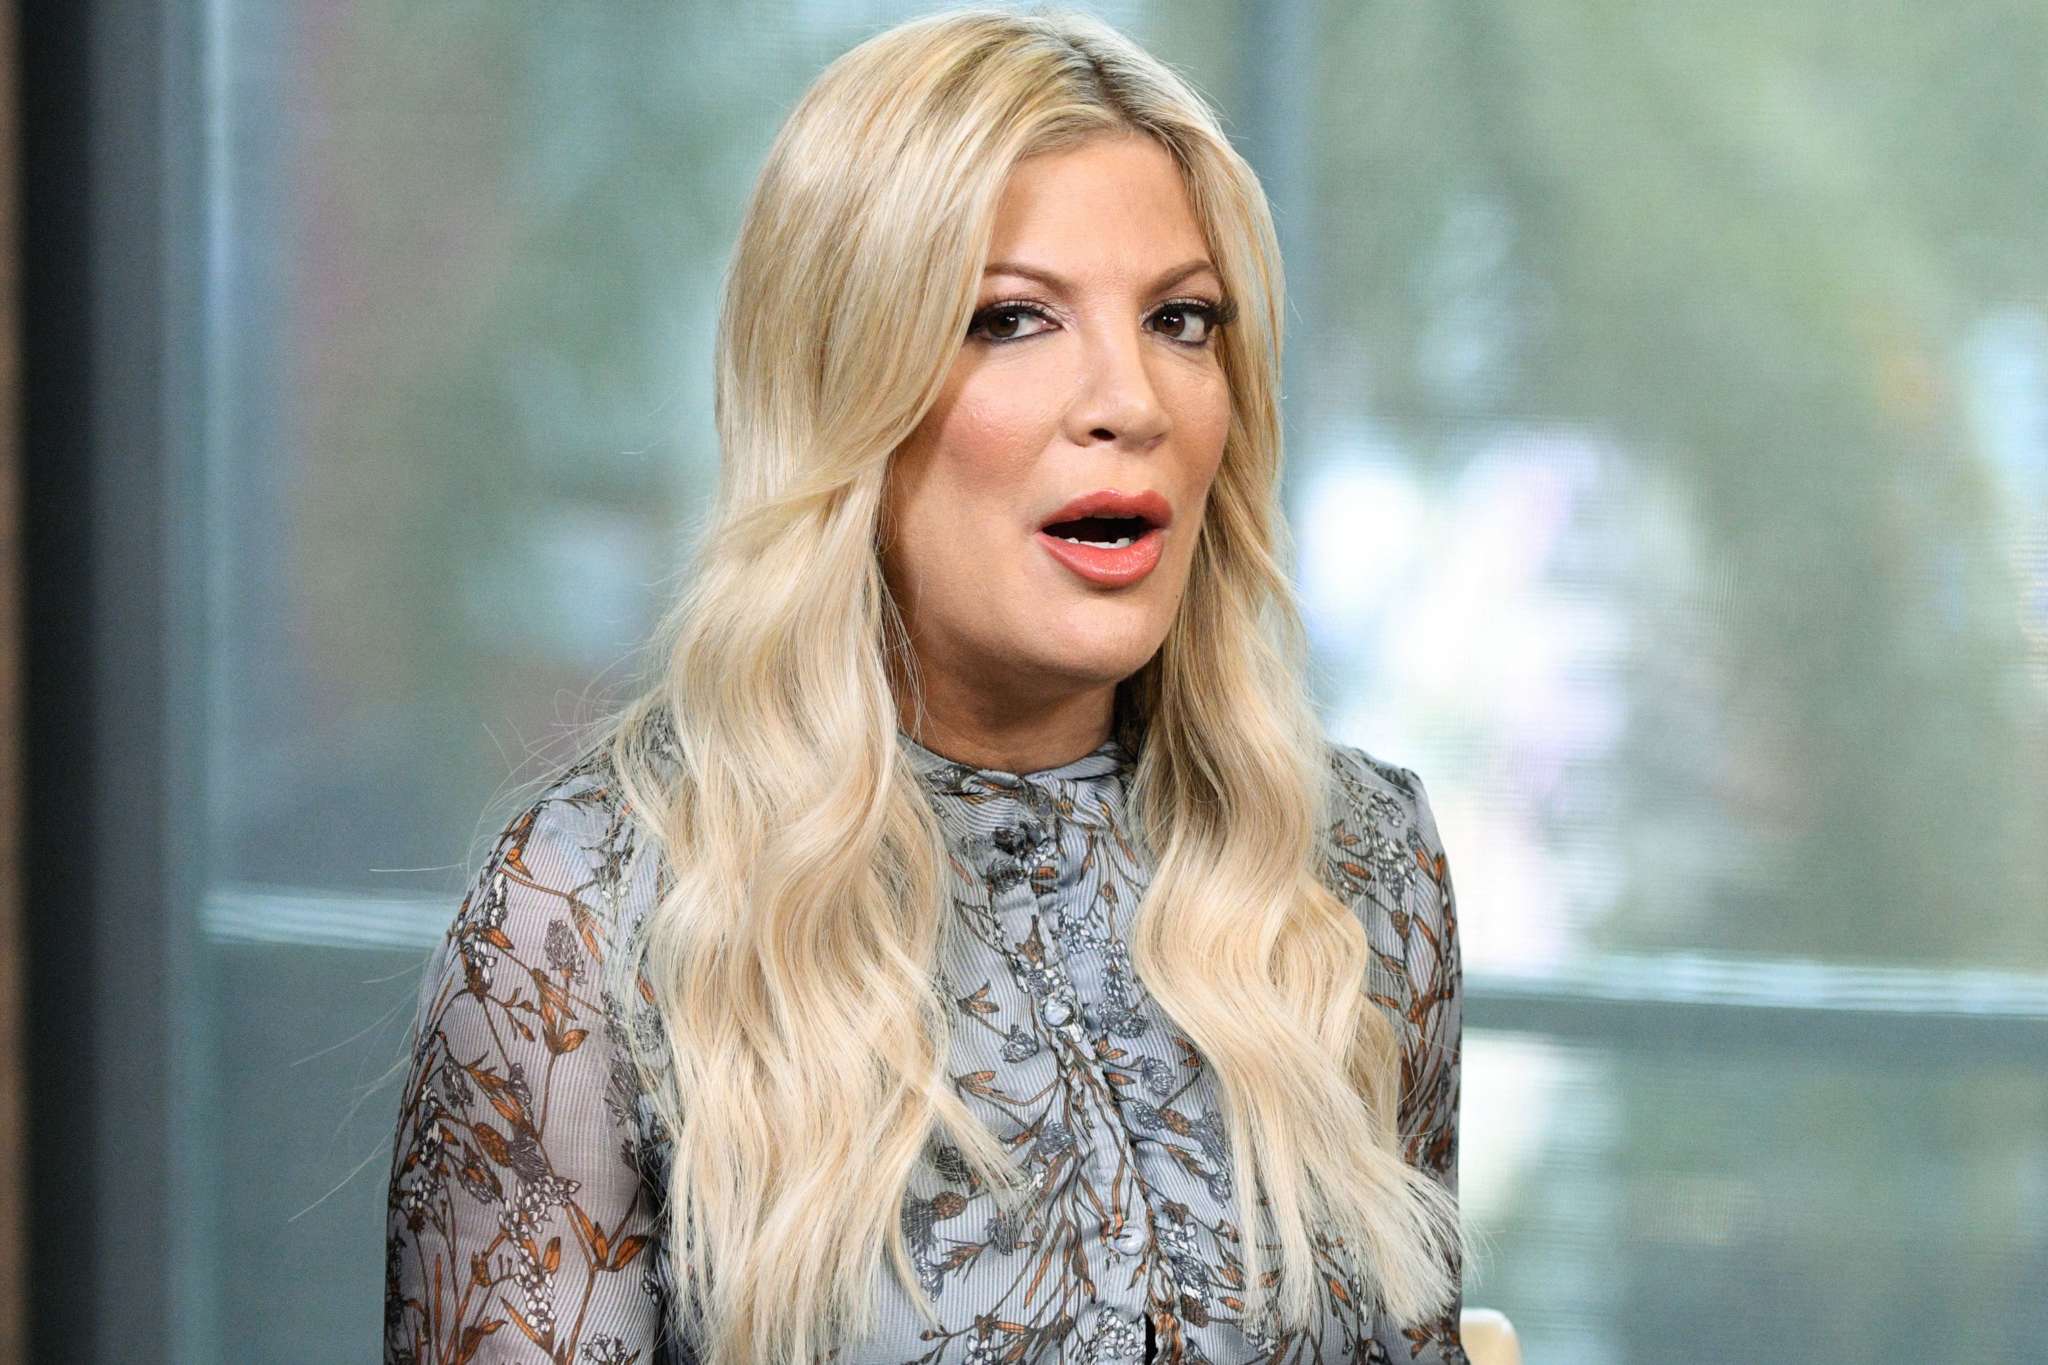 Tori Spelling Apologizes For Daughter Posing As “McQuisha,” Explaining They’re Shanaynay Fans